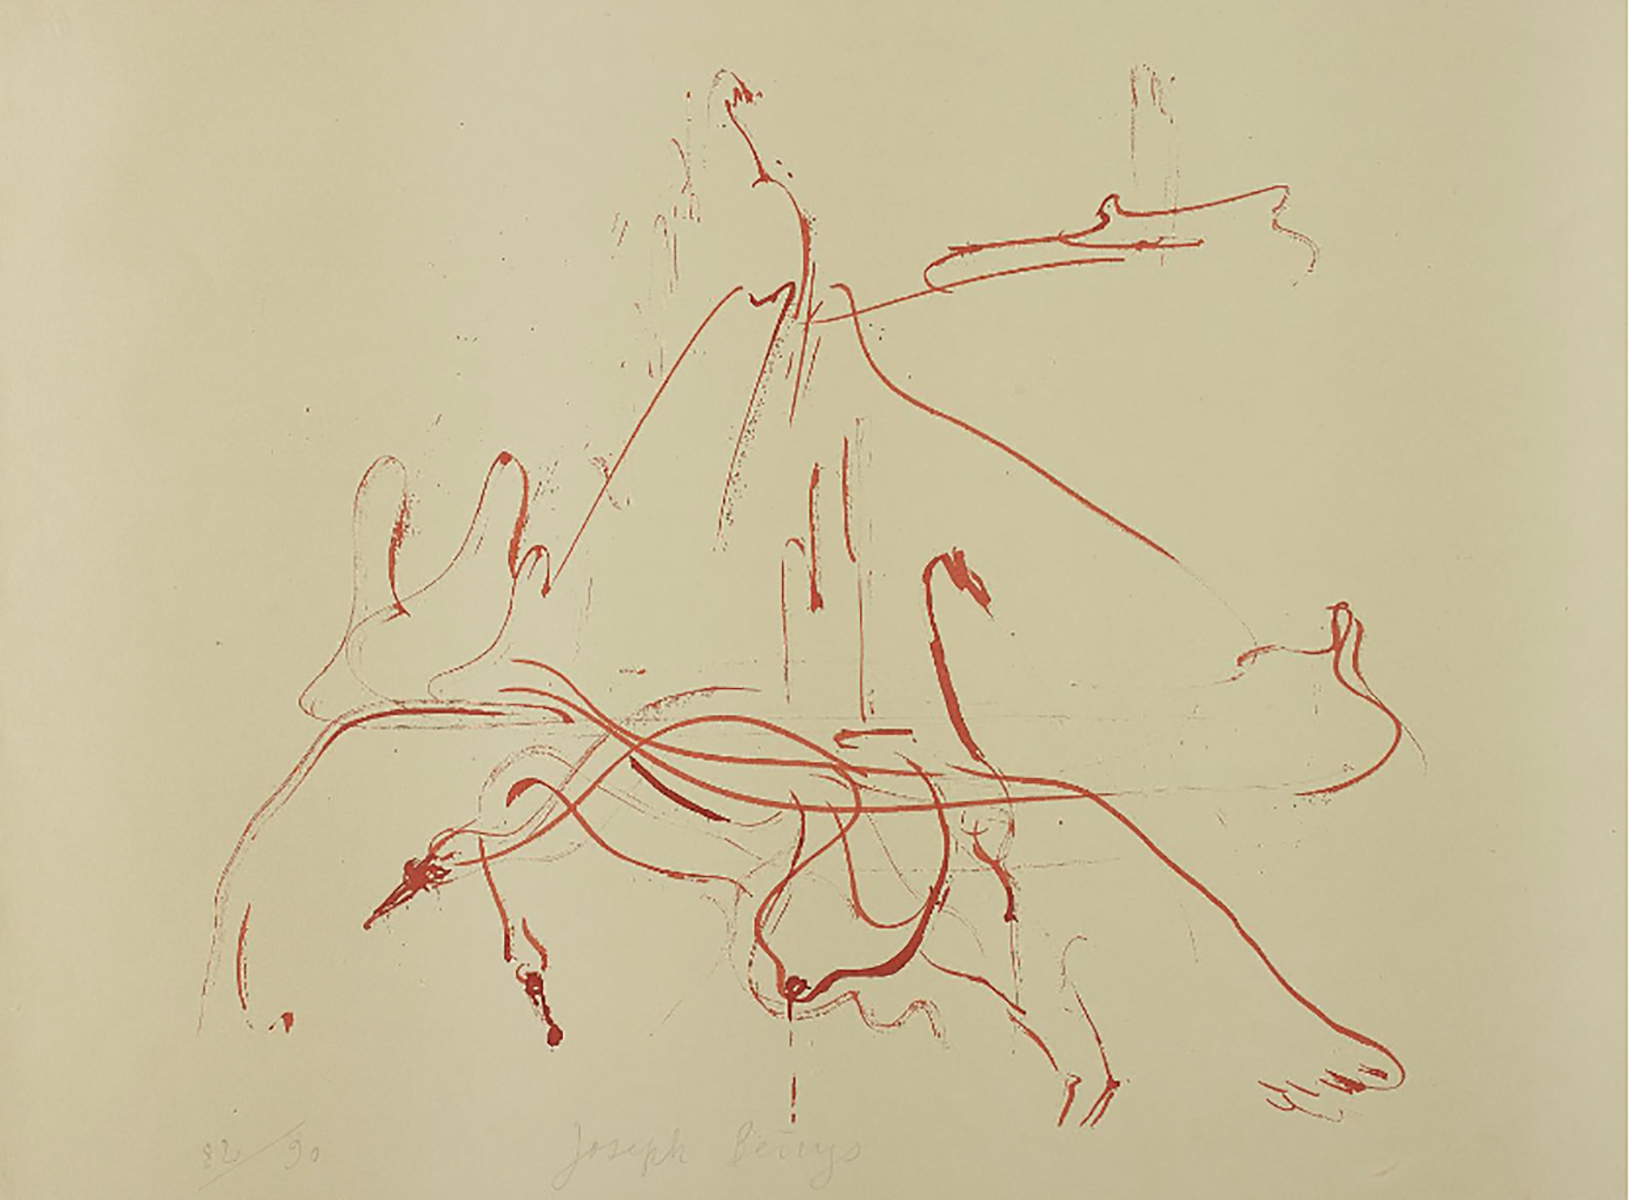 Joseph BEUYS (1921-1986)Lithograph in colors, on Rag paper, the full sheet56 x 75.9 cm Signed and numbered 82/90 in pencil(30 impressions in Roman numerals reserved for museums, +15 APs)Published by Propyläen Verlag, Berlin and Pantheon Presse, Rome